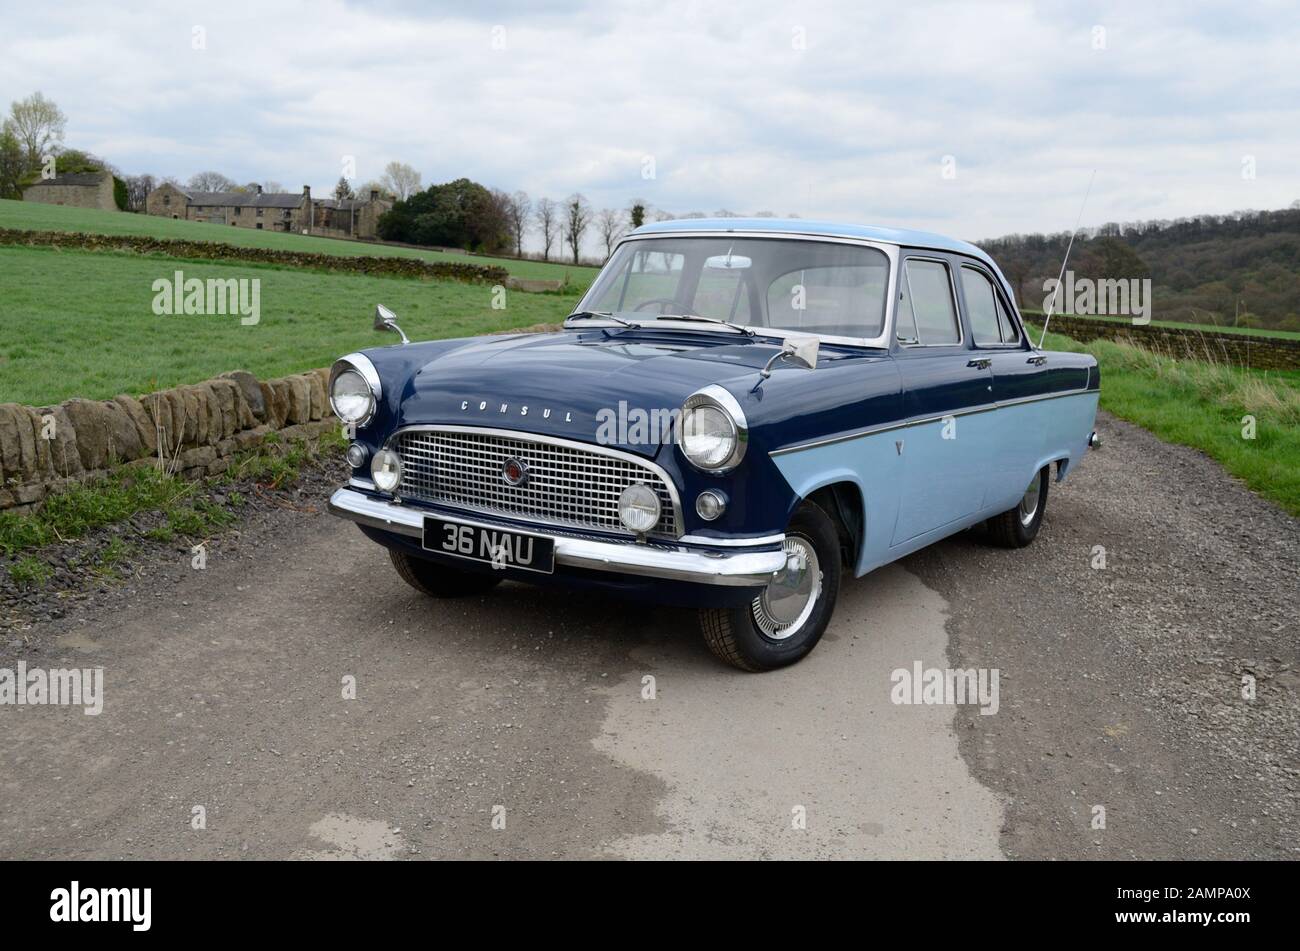 Vauxhall Cresta parked on a country lane in Winter Stock Photo